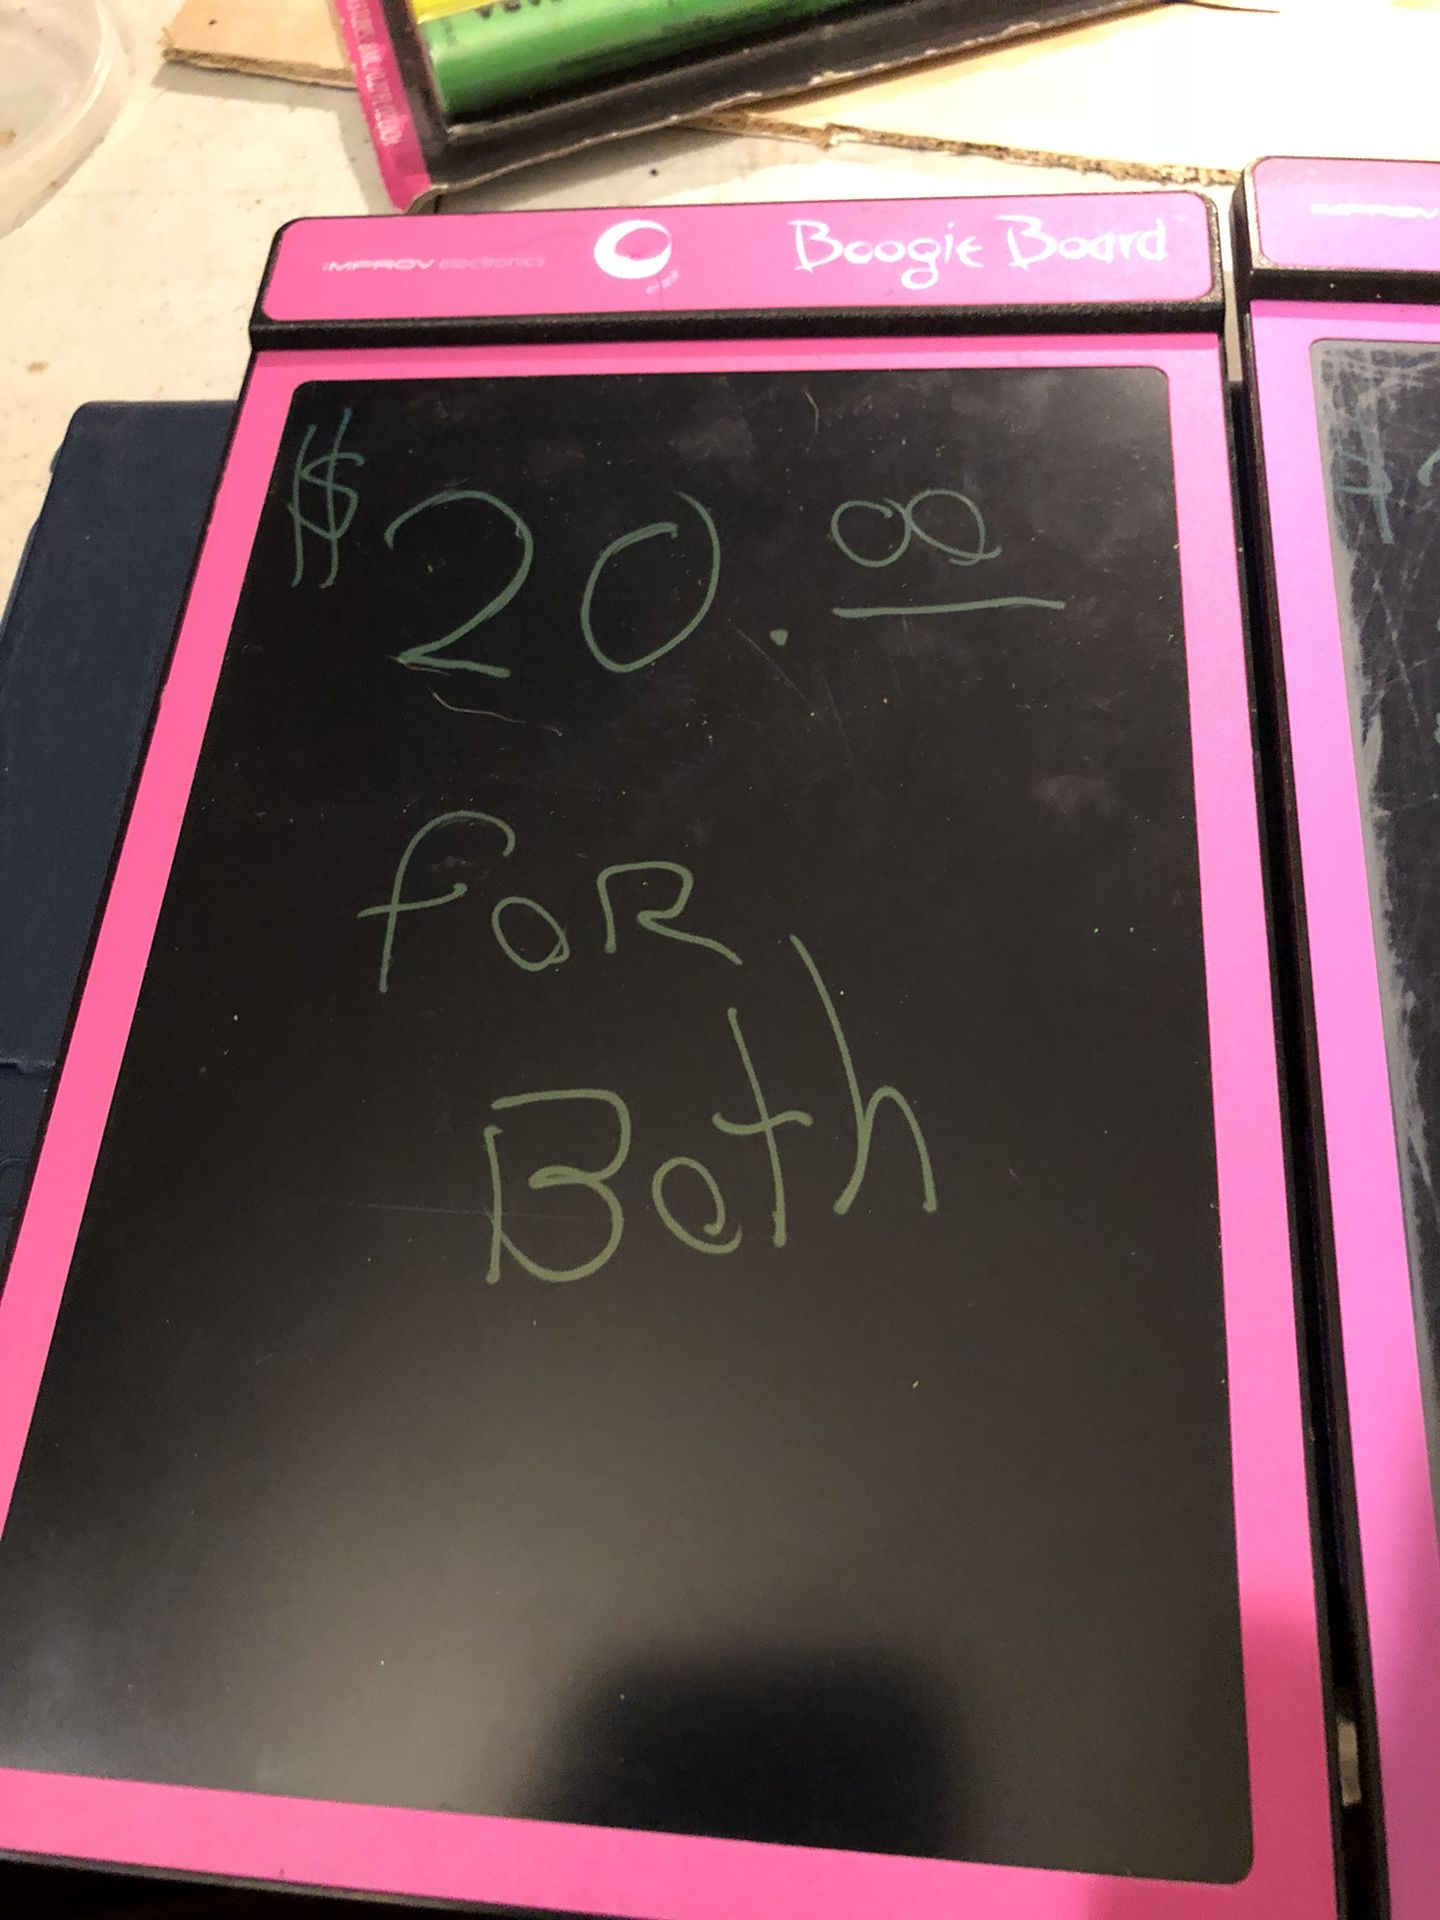 Boogie boards 2 for $20